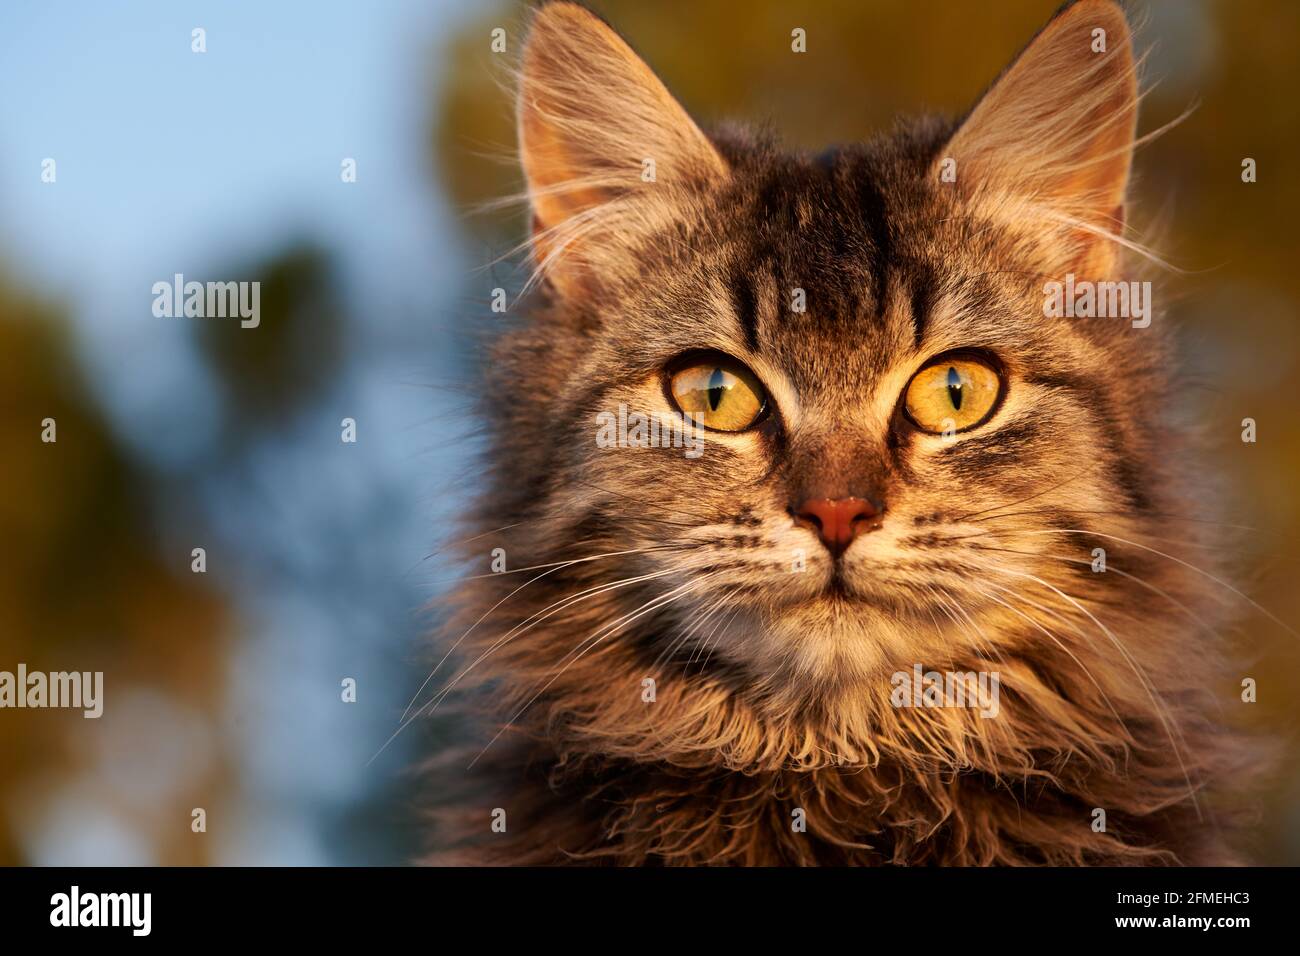 Closeup portrait of tabby kitten looking directly ath the camera Stock Photo